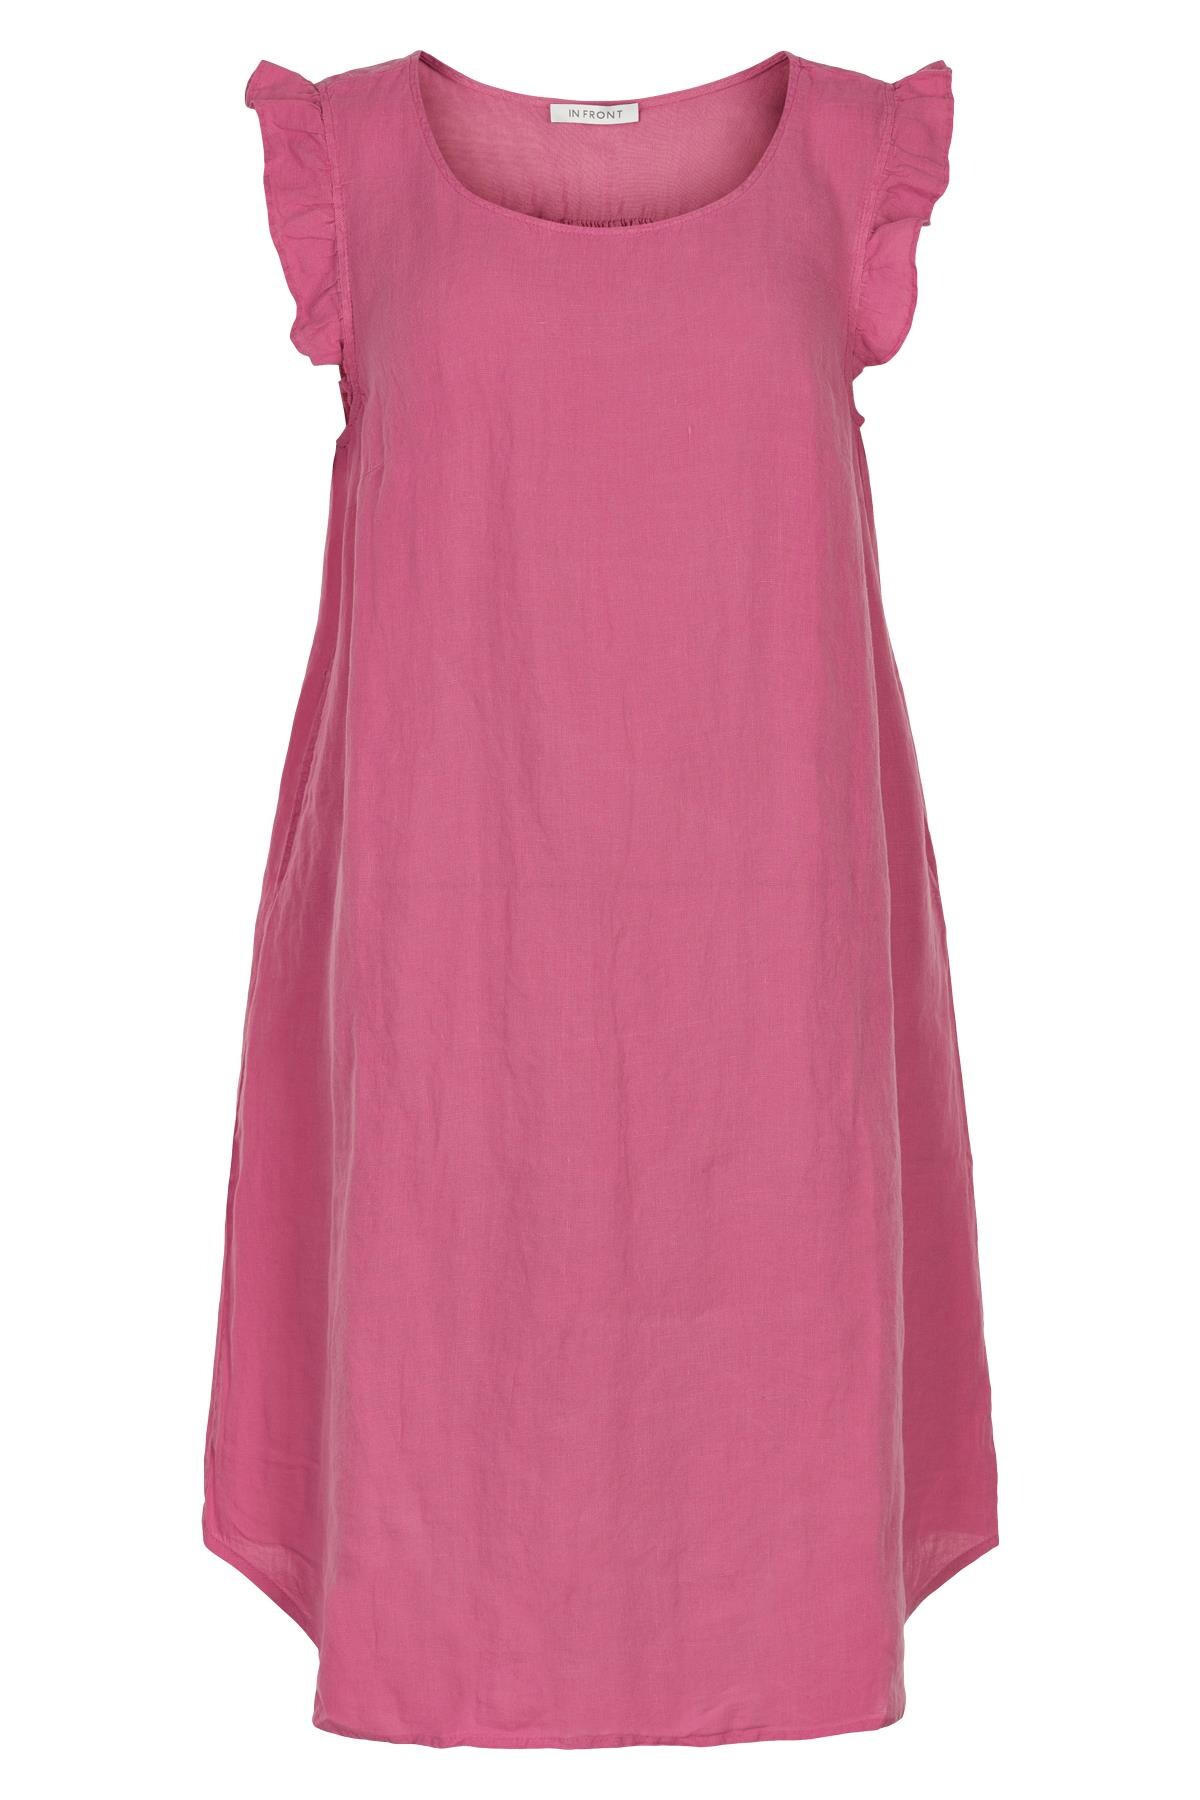 IN FRONT LINO DRESS 15071 221 (Pink 221, S)